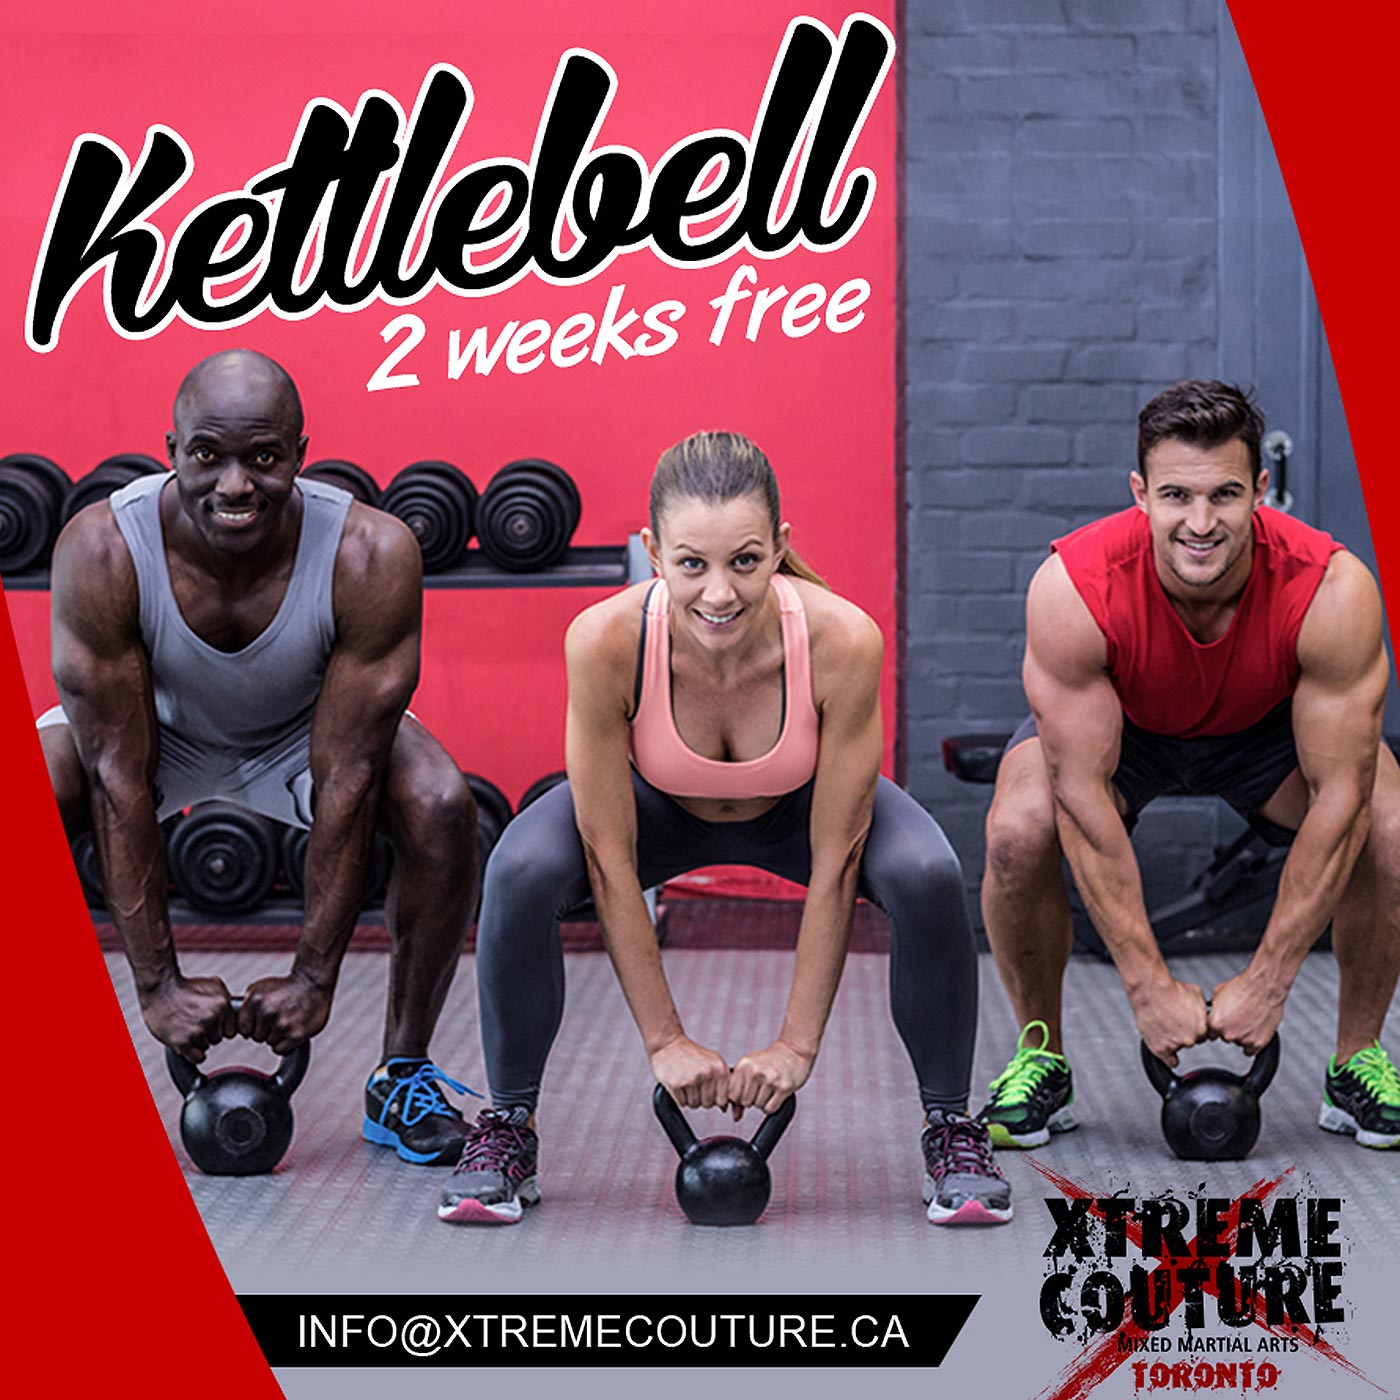 Free Kettlebell Classes for 2 Weeks